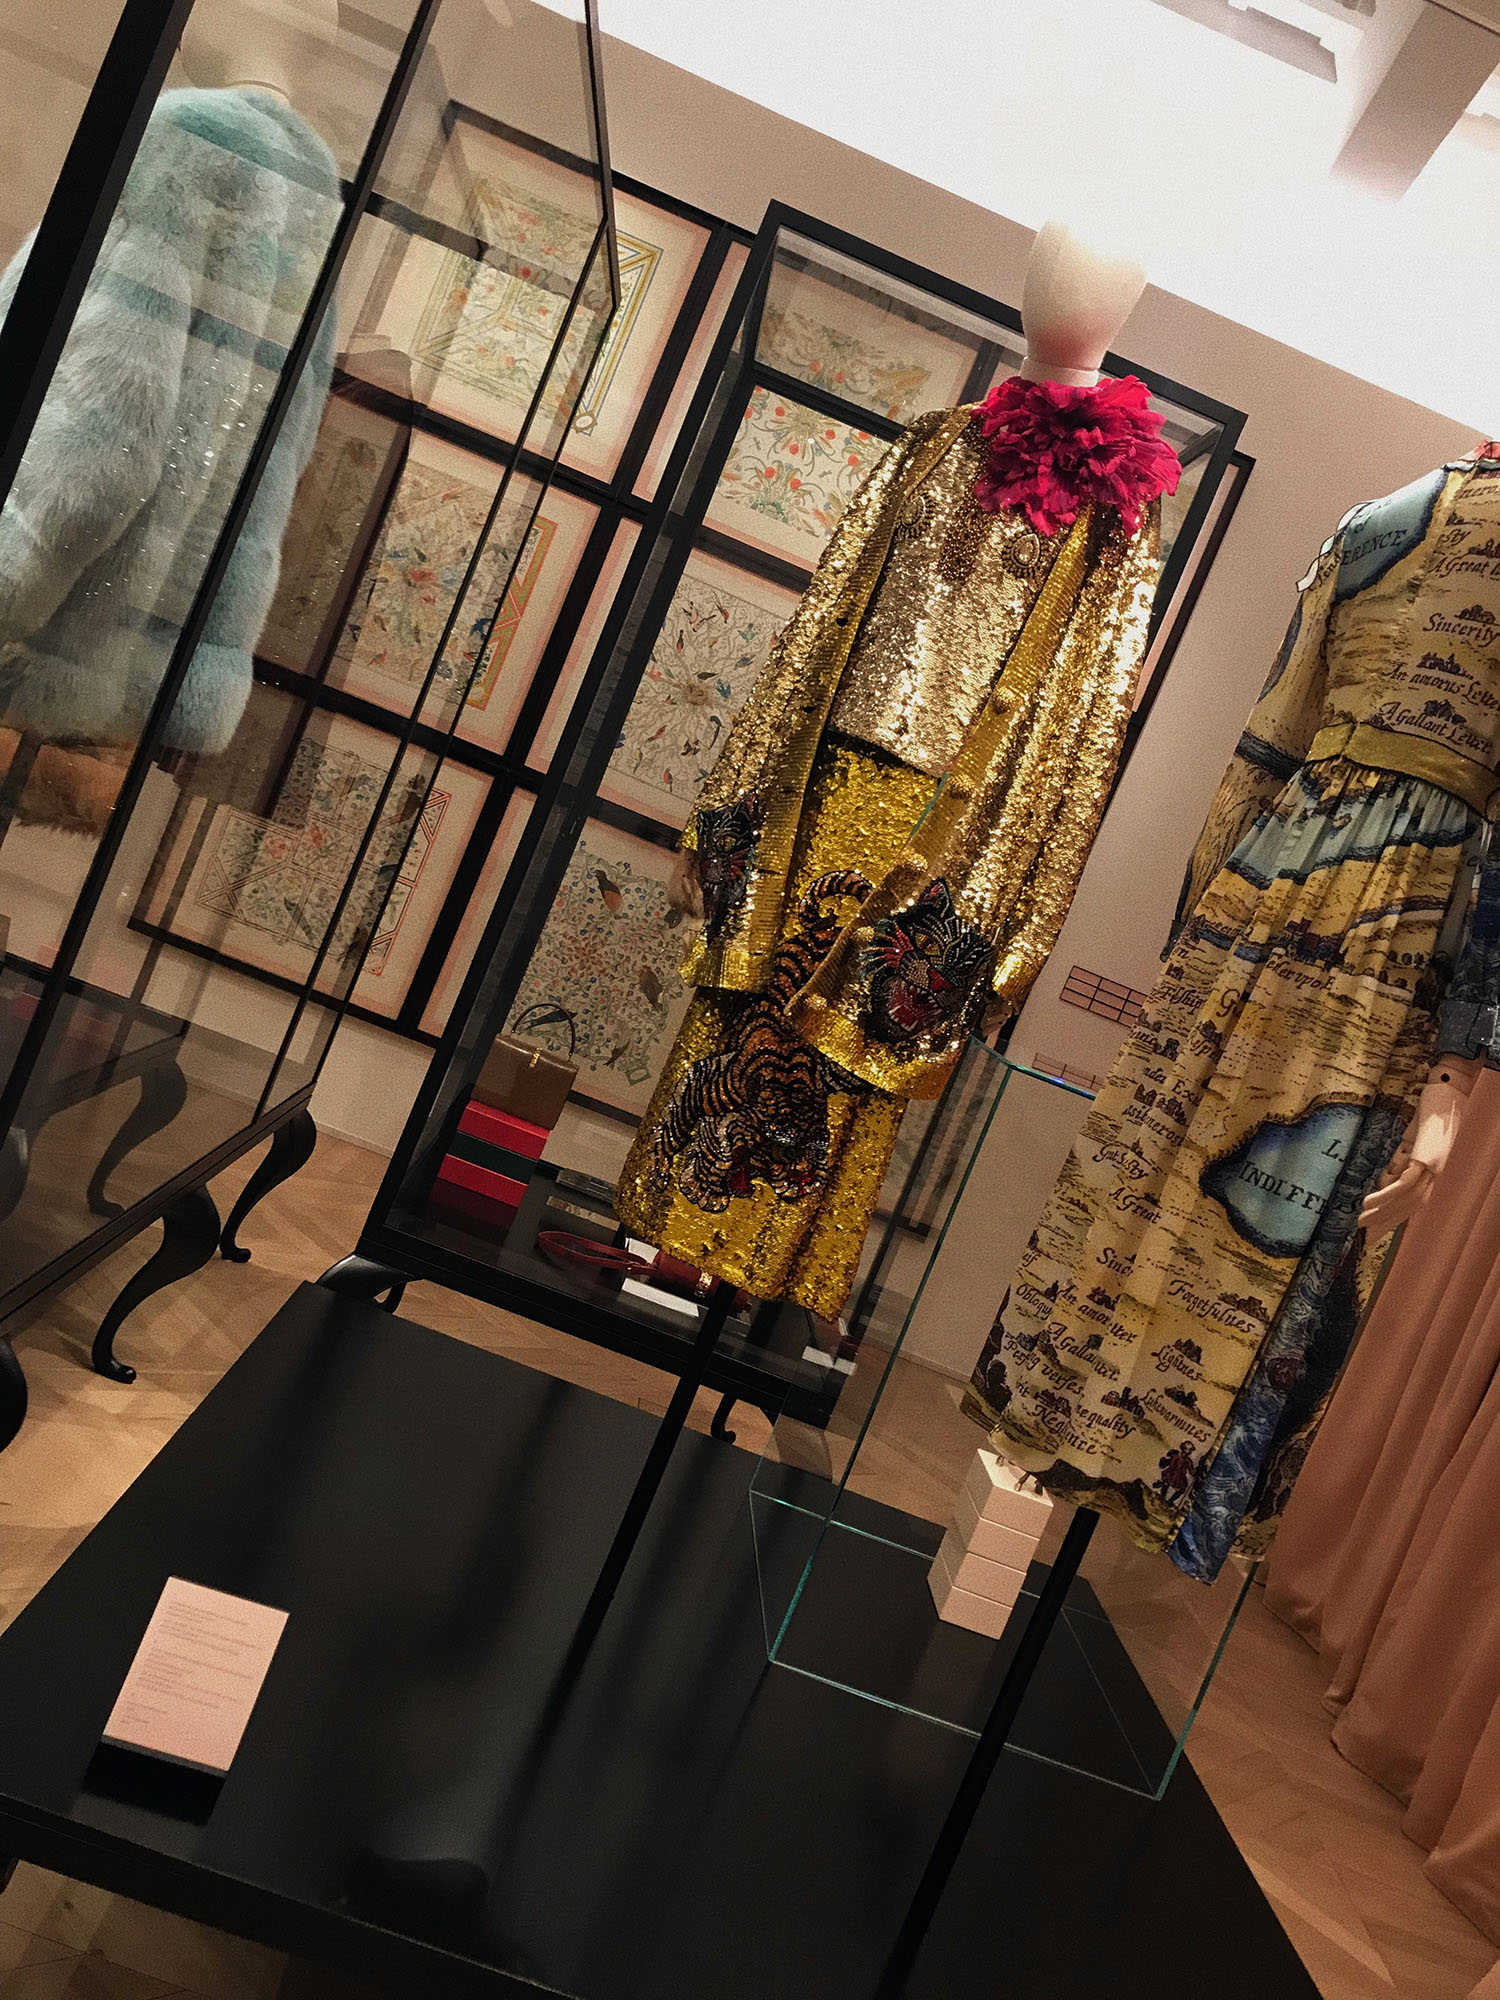 Coco & Vera - Sequinned dress at the Gucci Museum, Florence, Italy